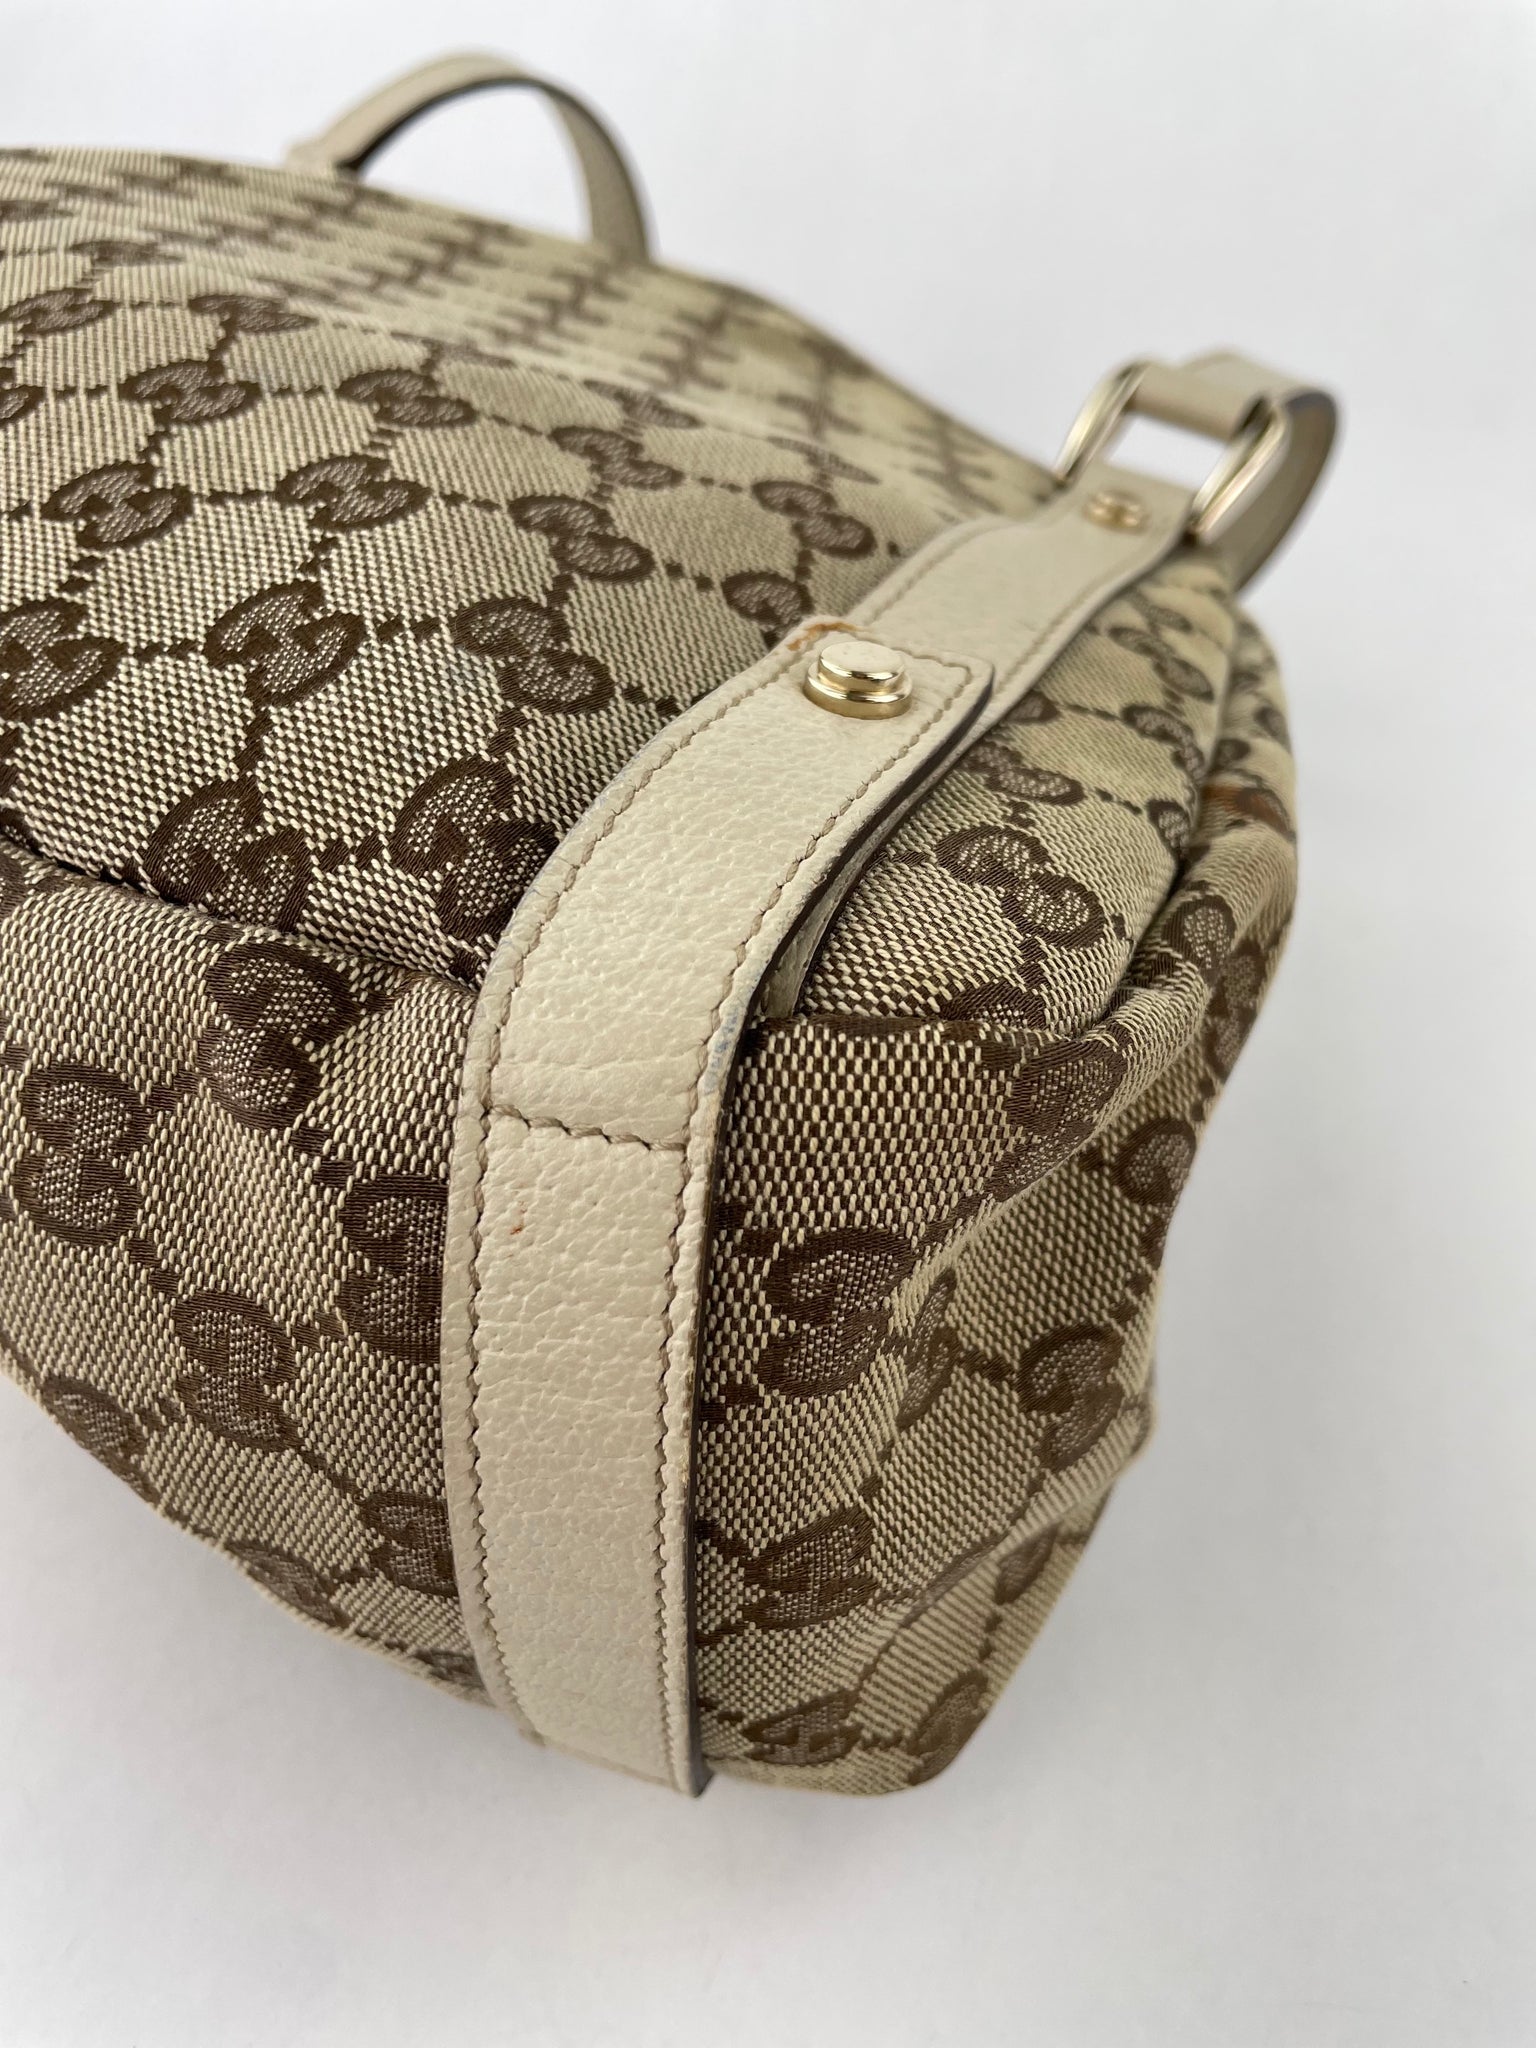 Louis Vuitton D-Ring Tote Bags